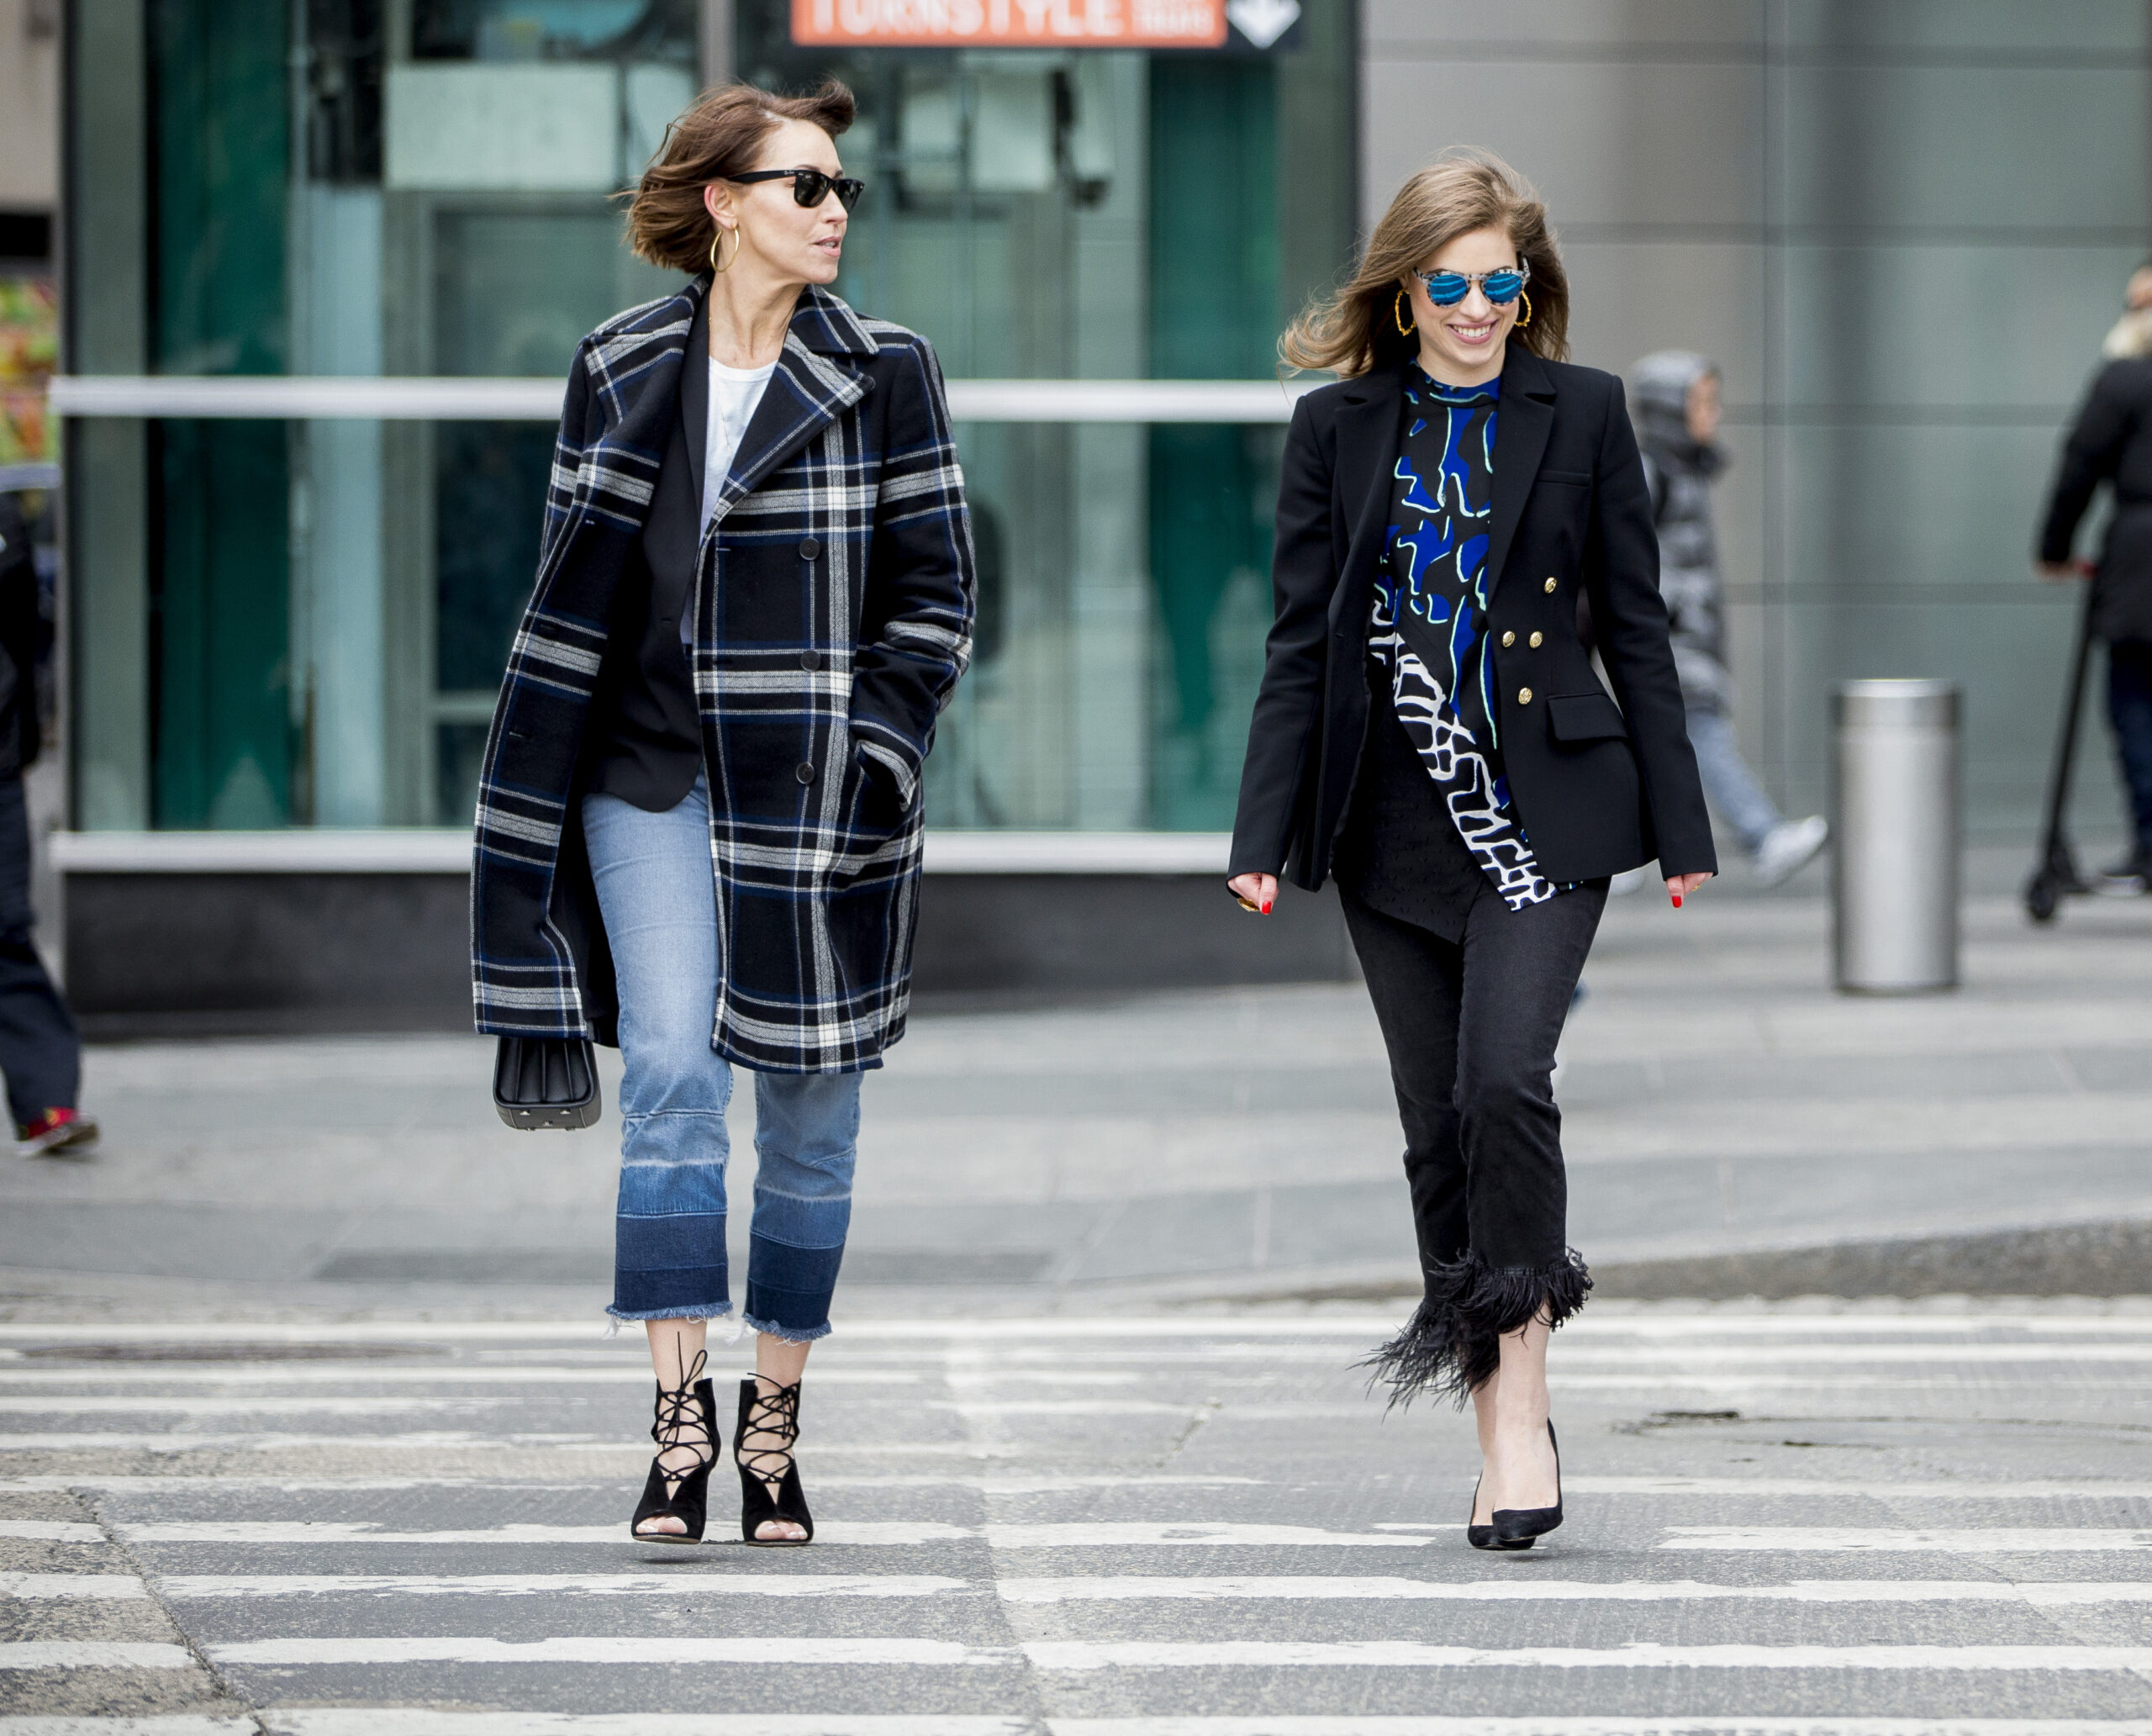 two white women with brown hair walking across a NYC crosswalk